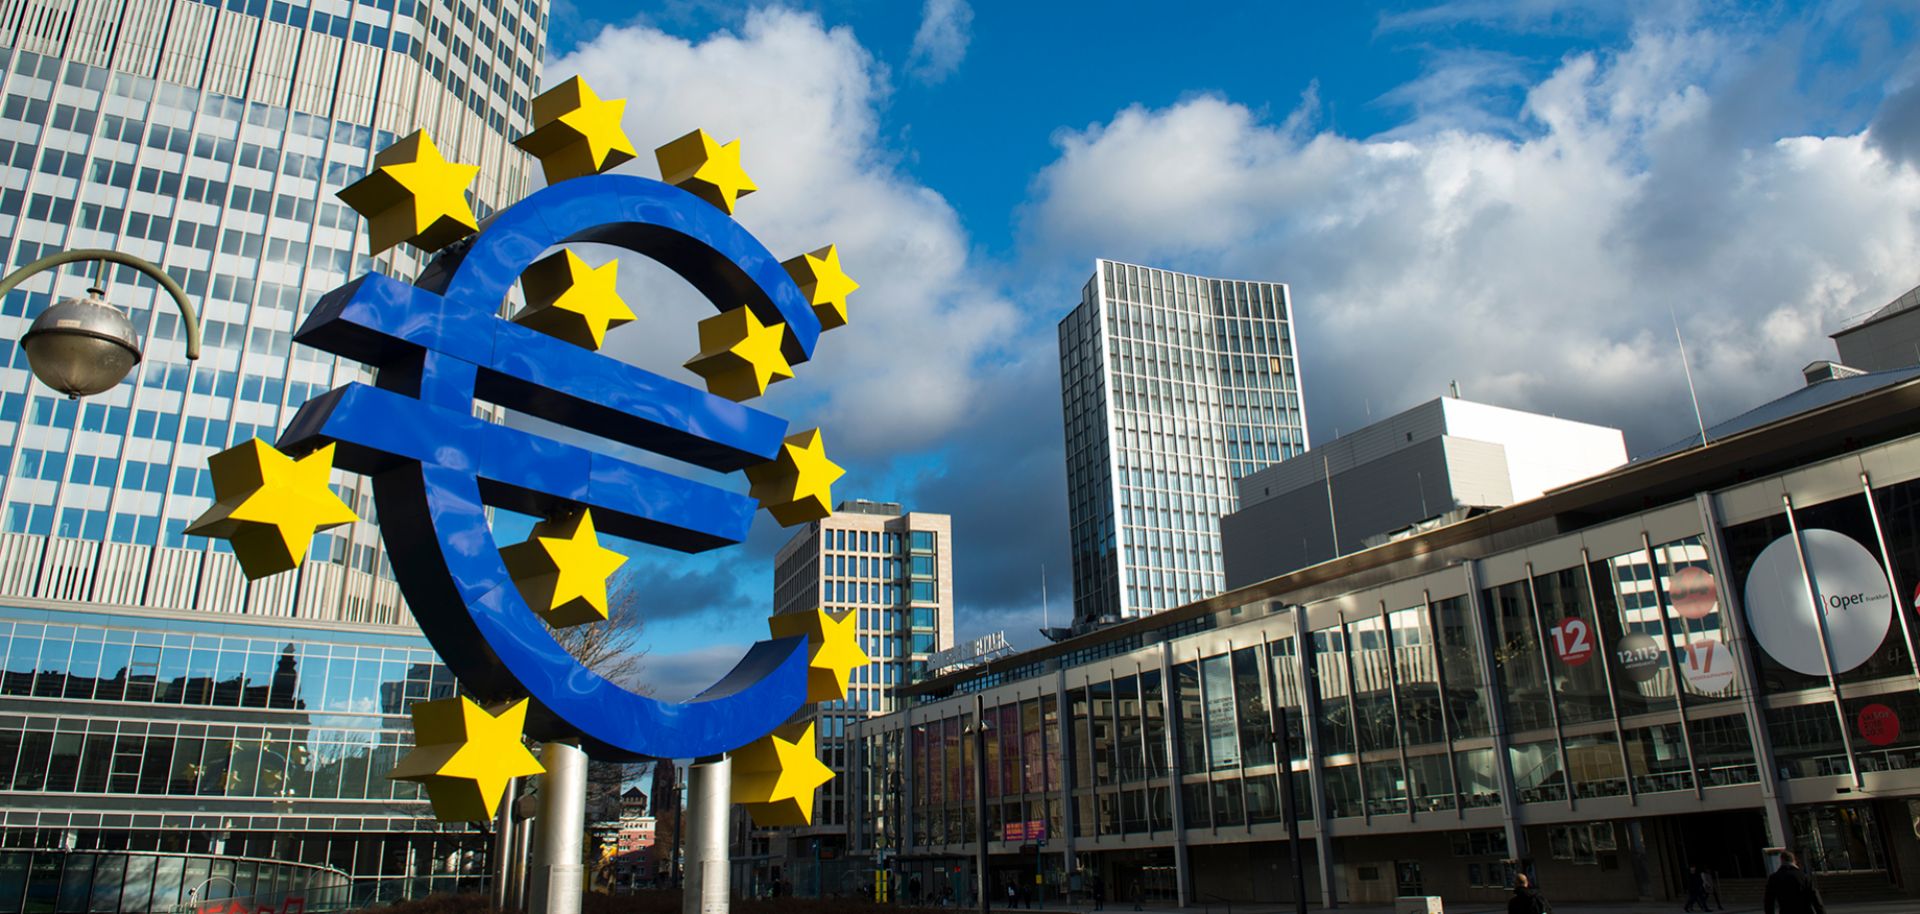 A statue depicting the euro is pictured outside the headquarters of the European Central Bank, which serves as the central bank of the 19 EU countries within the eurozone, in Frankfurt, Germany.  